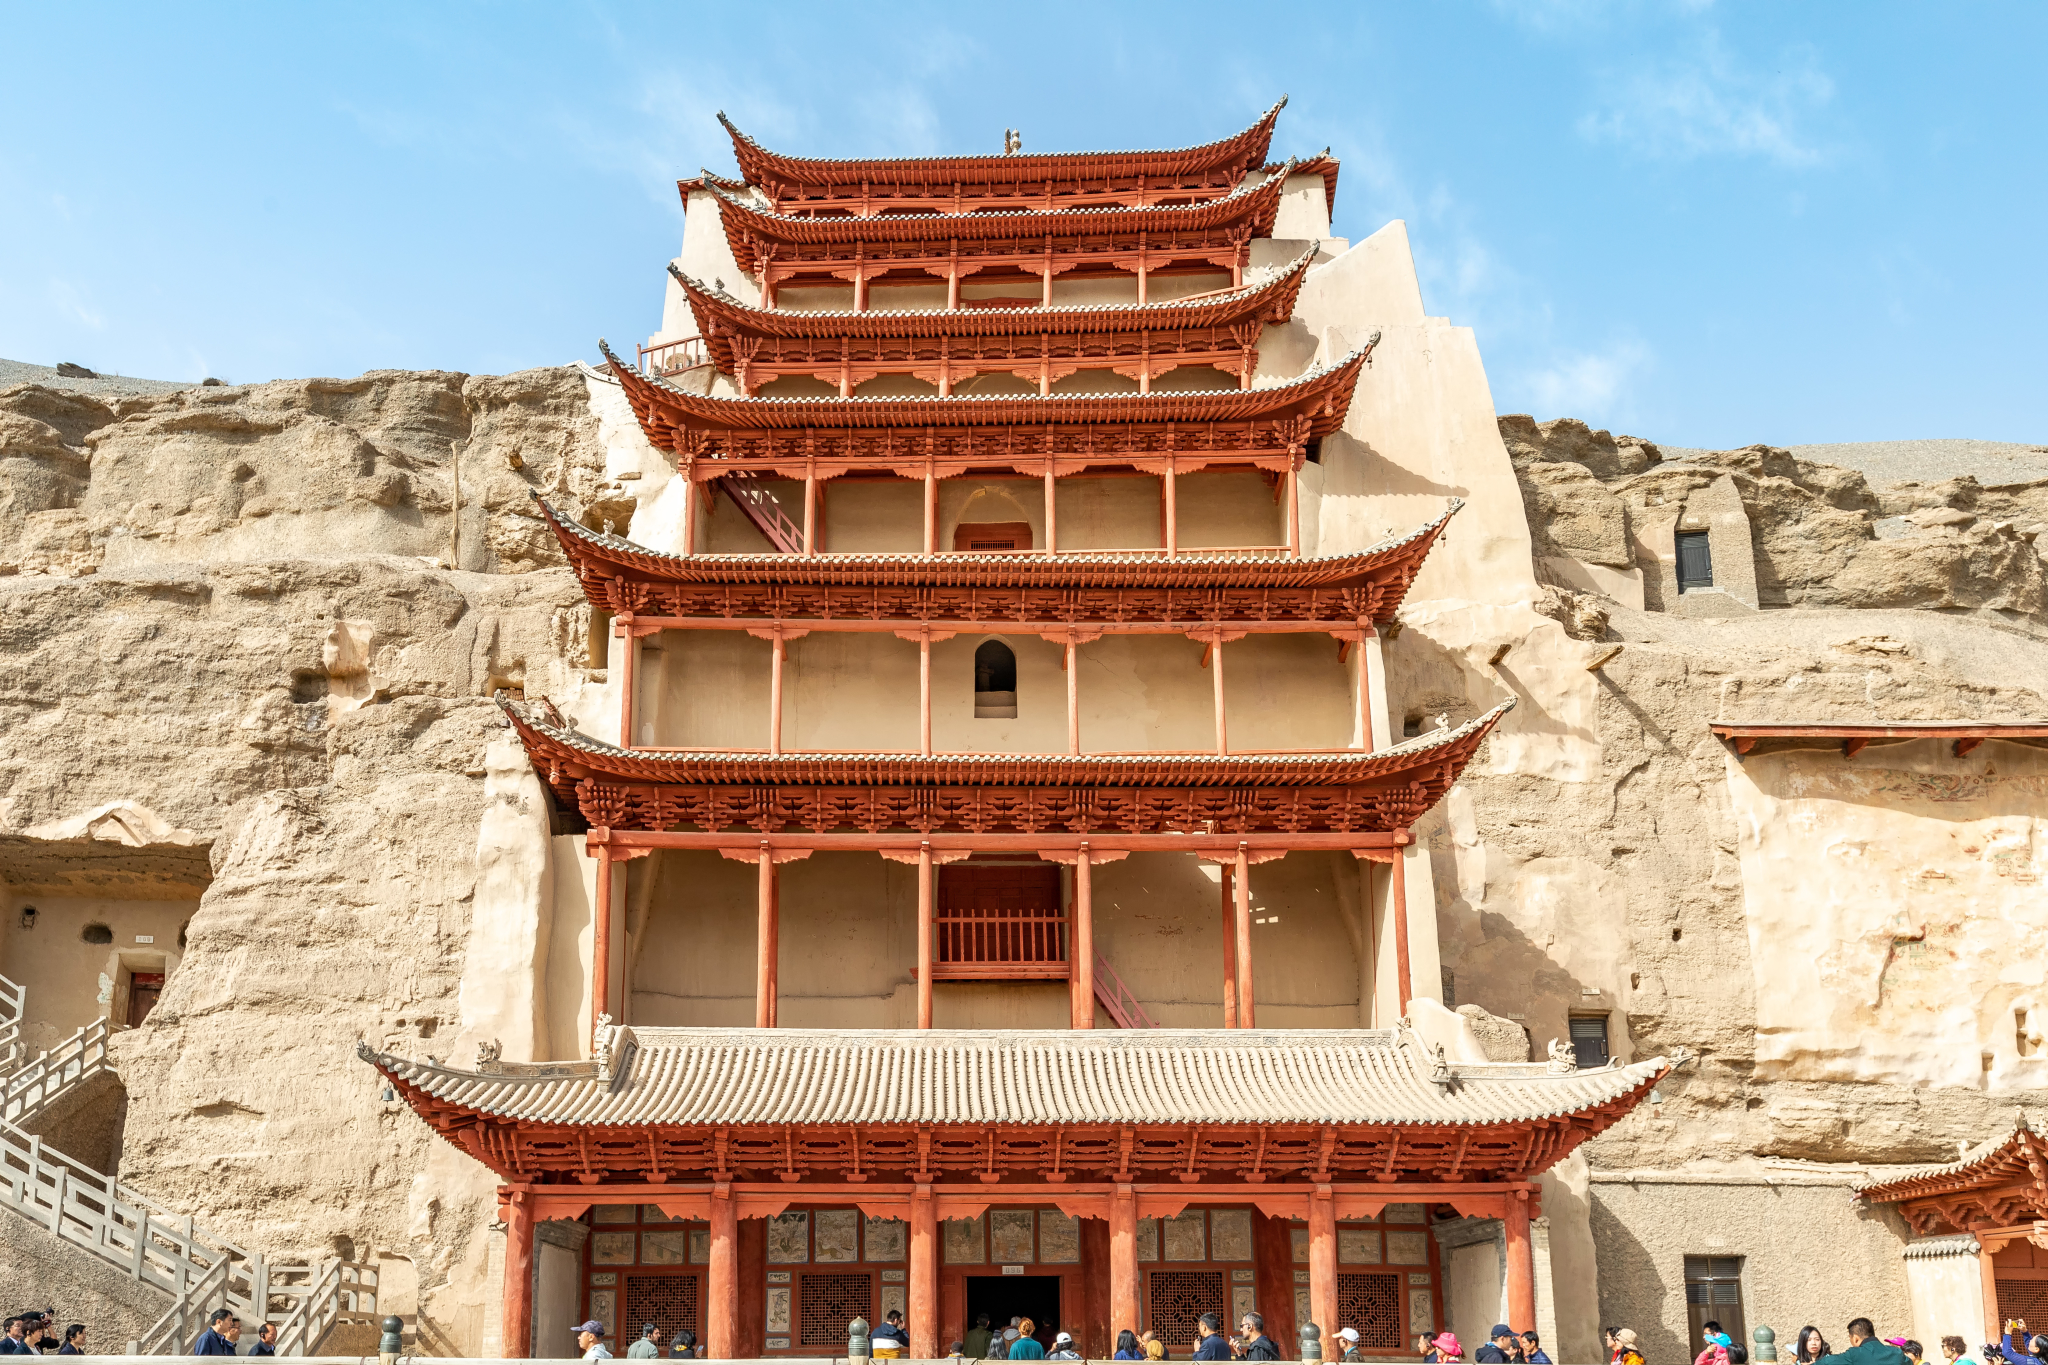 DunHuang Mogao Caves